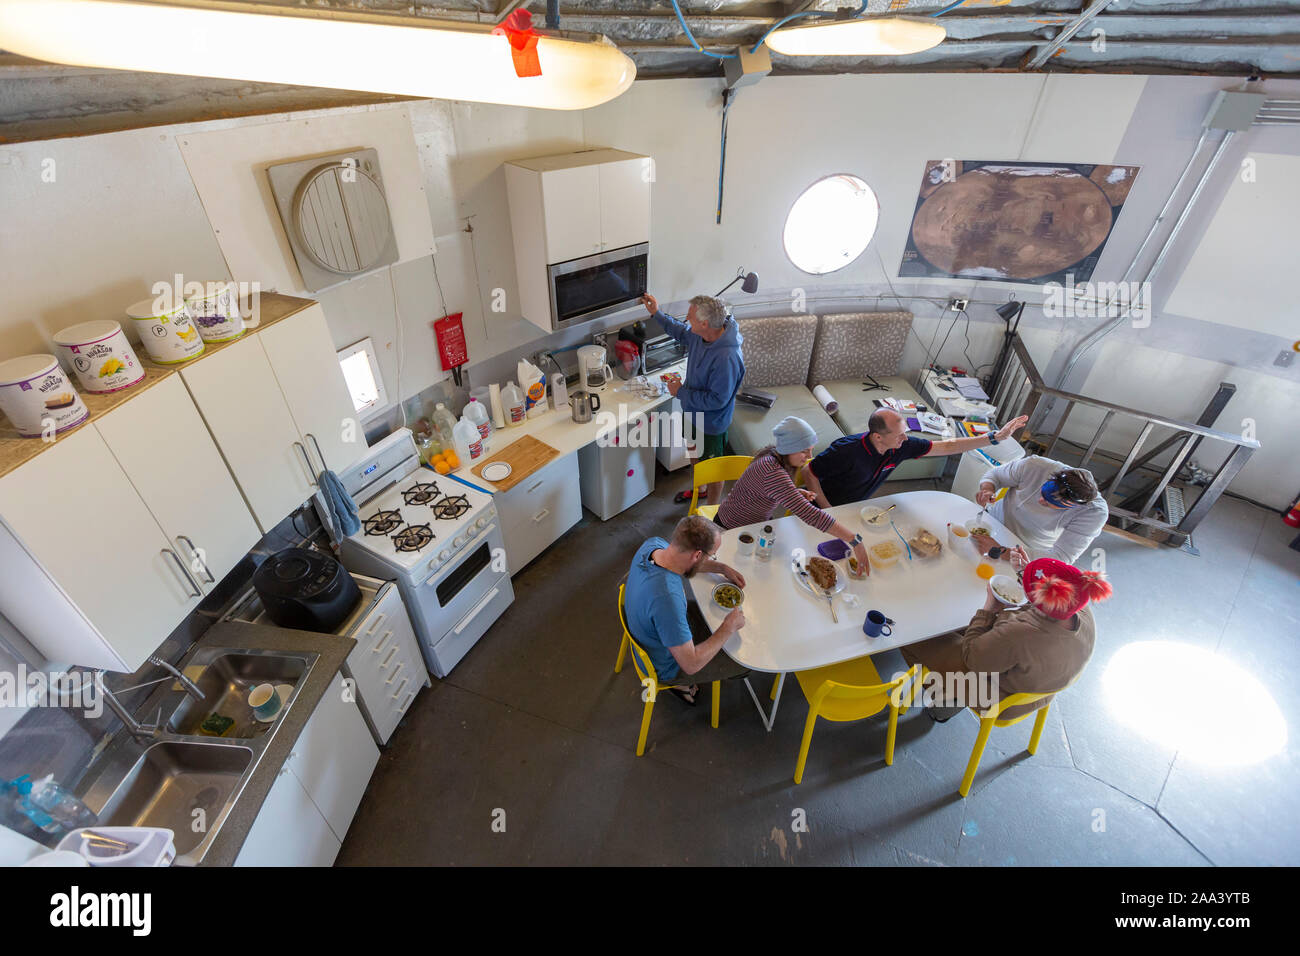 Hanksville, Utah - Researchers simulate living on Mars at the Mars Desert Research Station. The Australian crew of 'Expedition Boomerang' ate lunch at Stock Photo